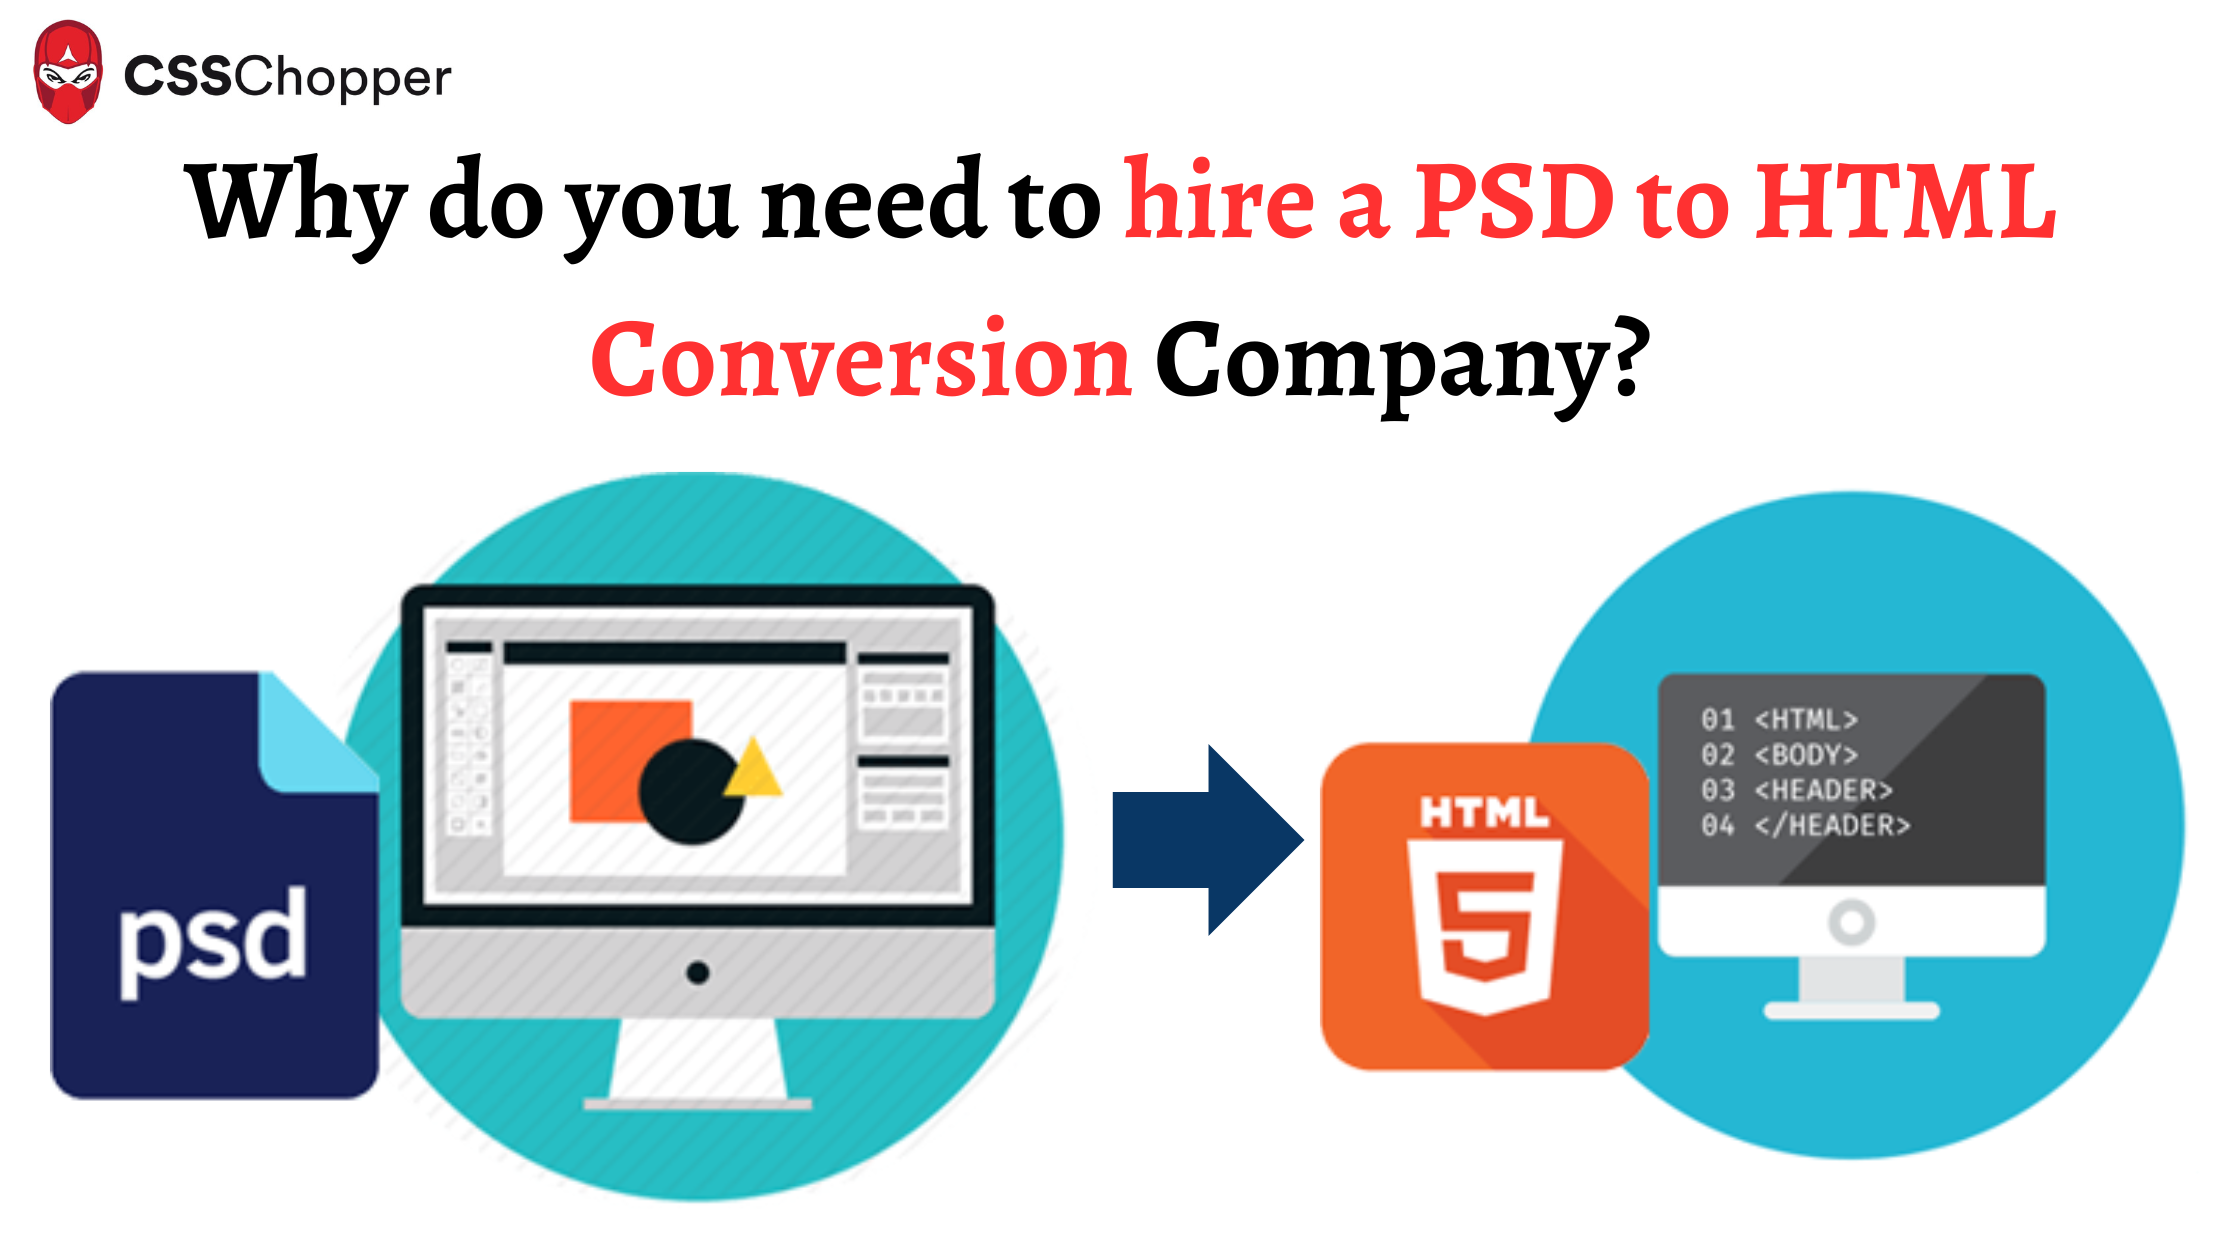 Why do you need to hire a PSD to HTML Conversion Company